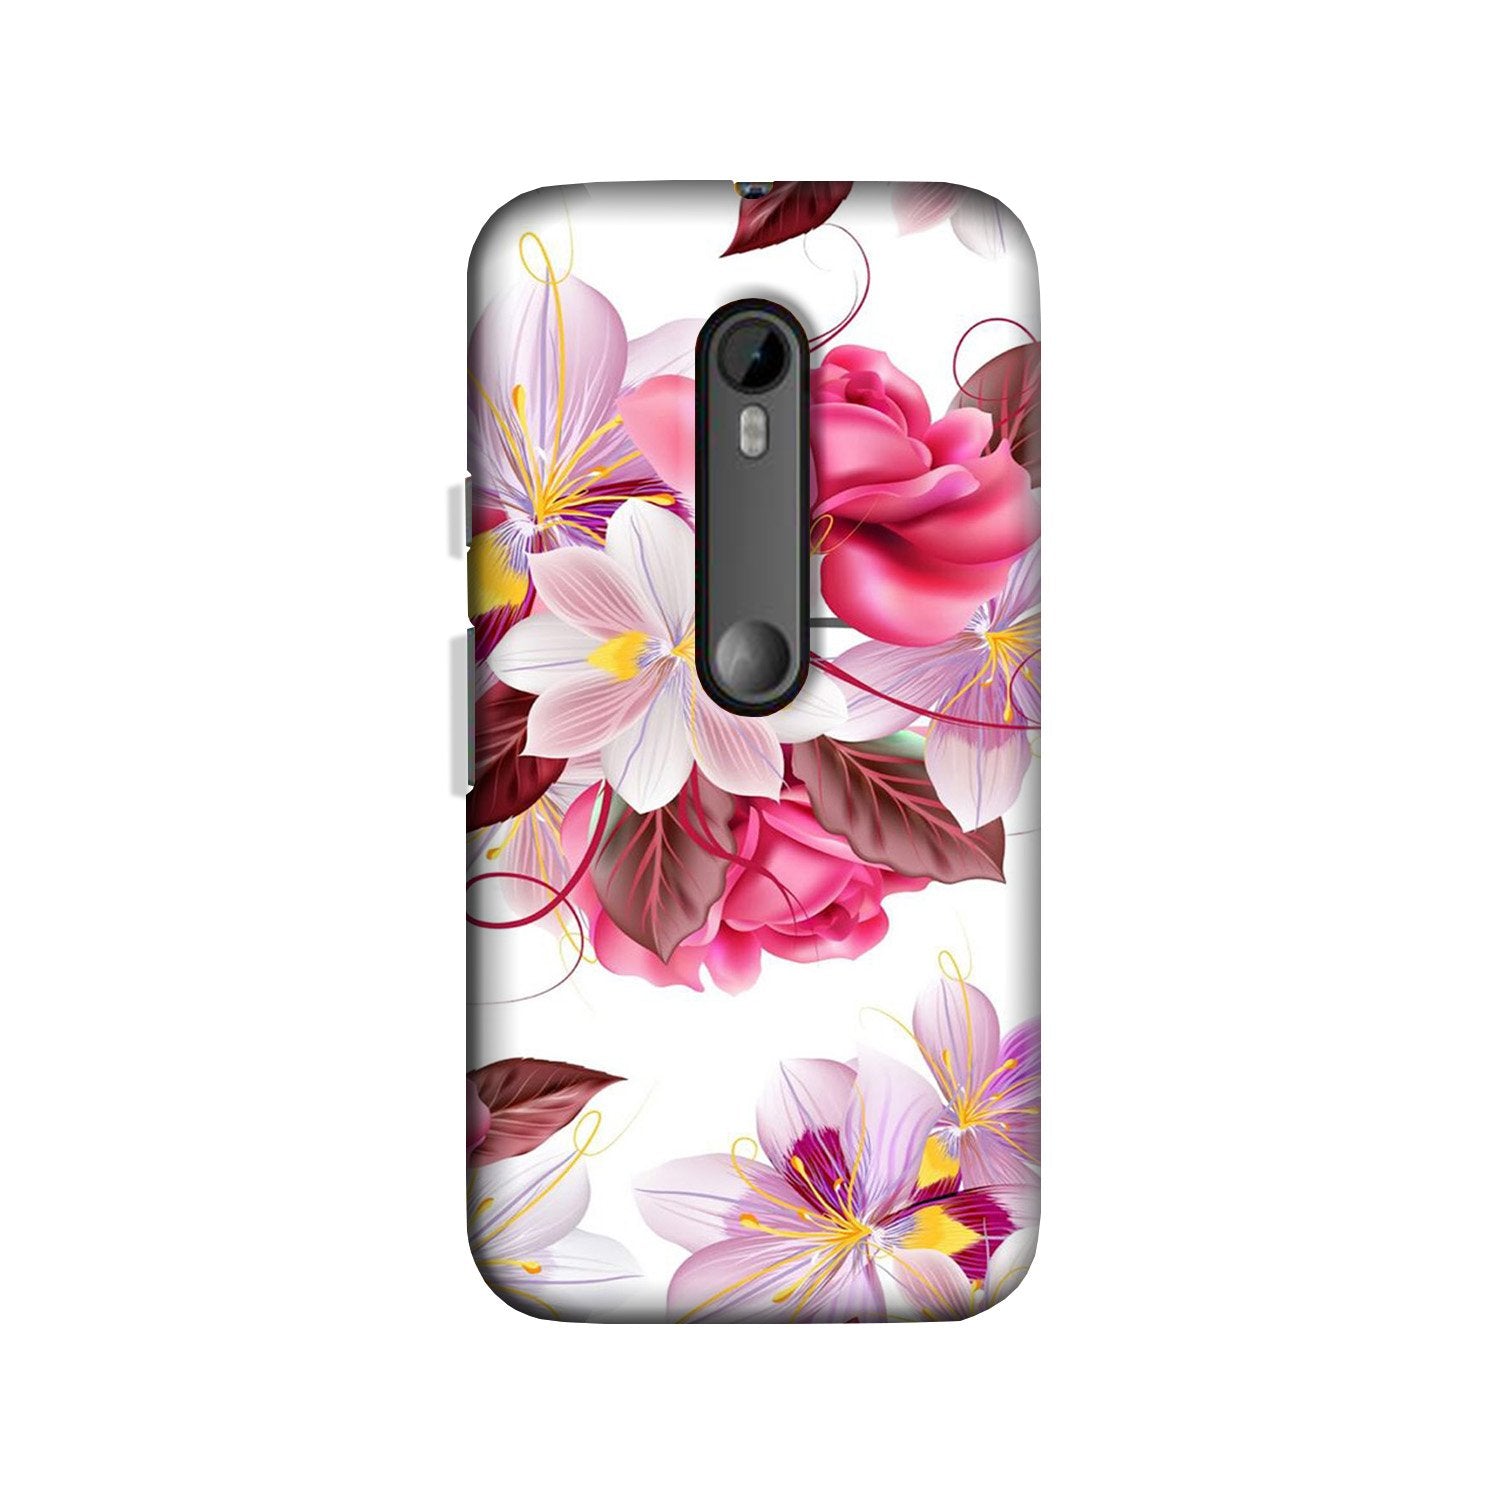 Beautiful flowers Case for Moto X Style